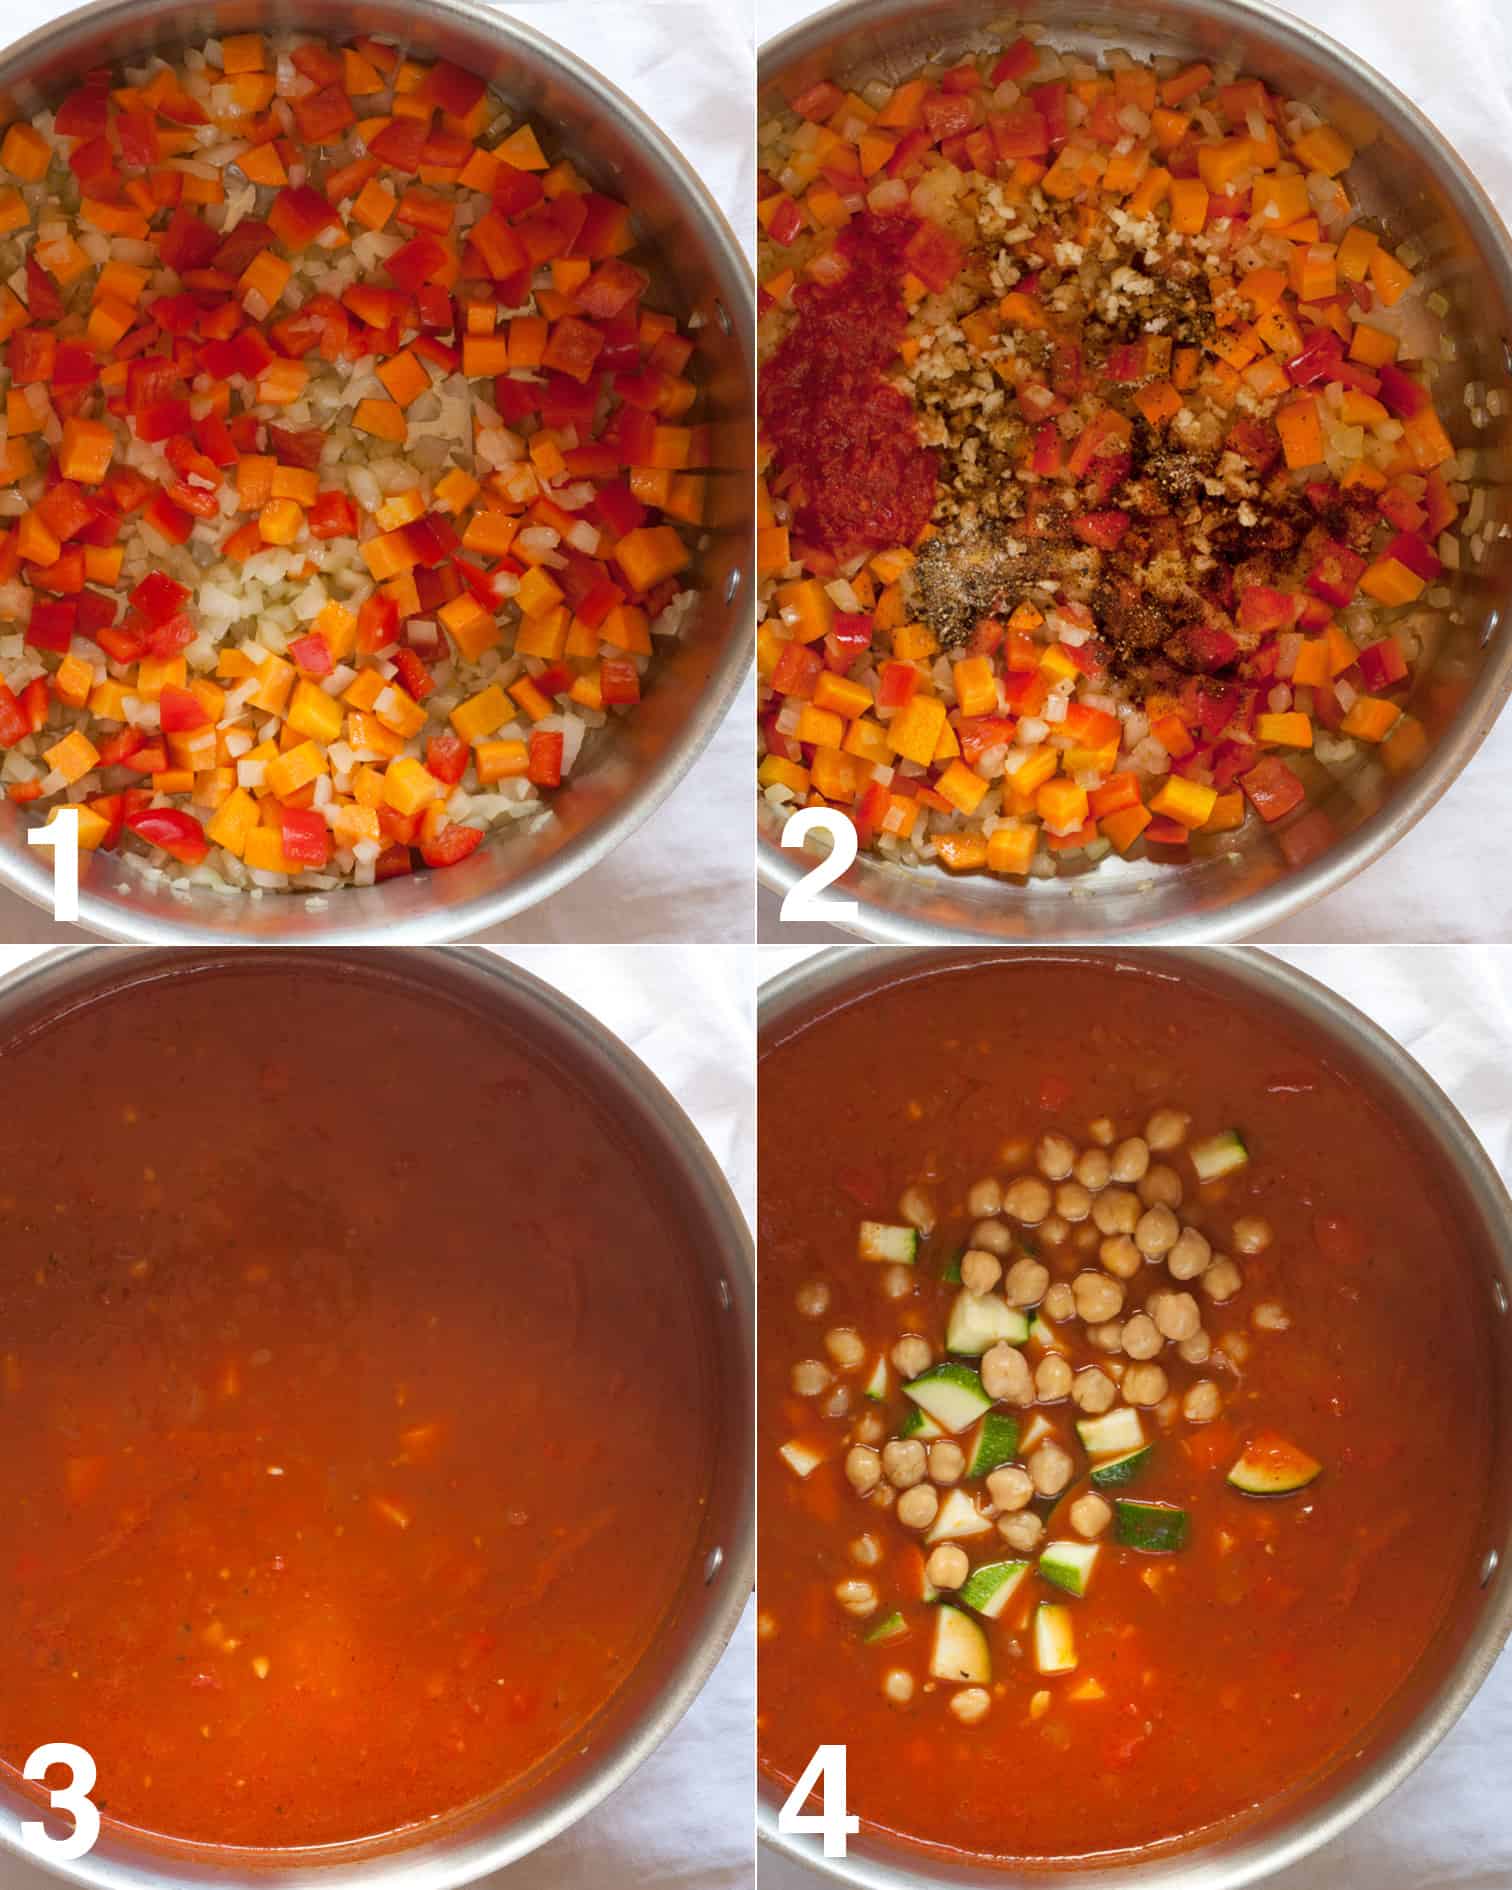 Steps making spicy vegetable soup